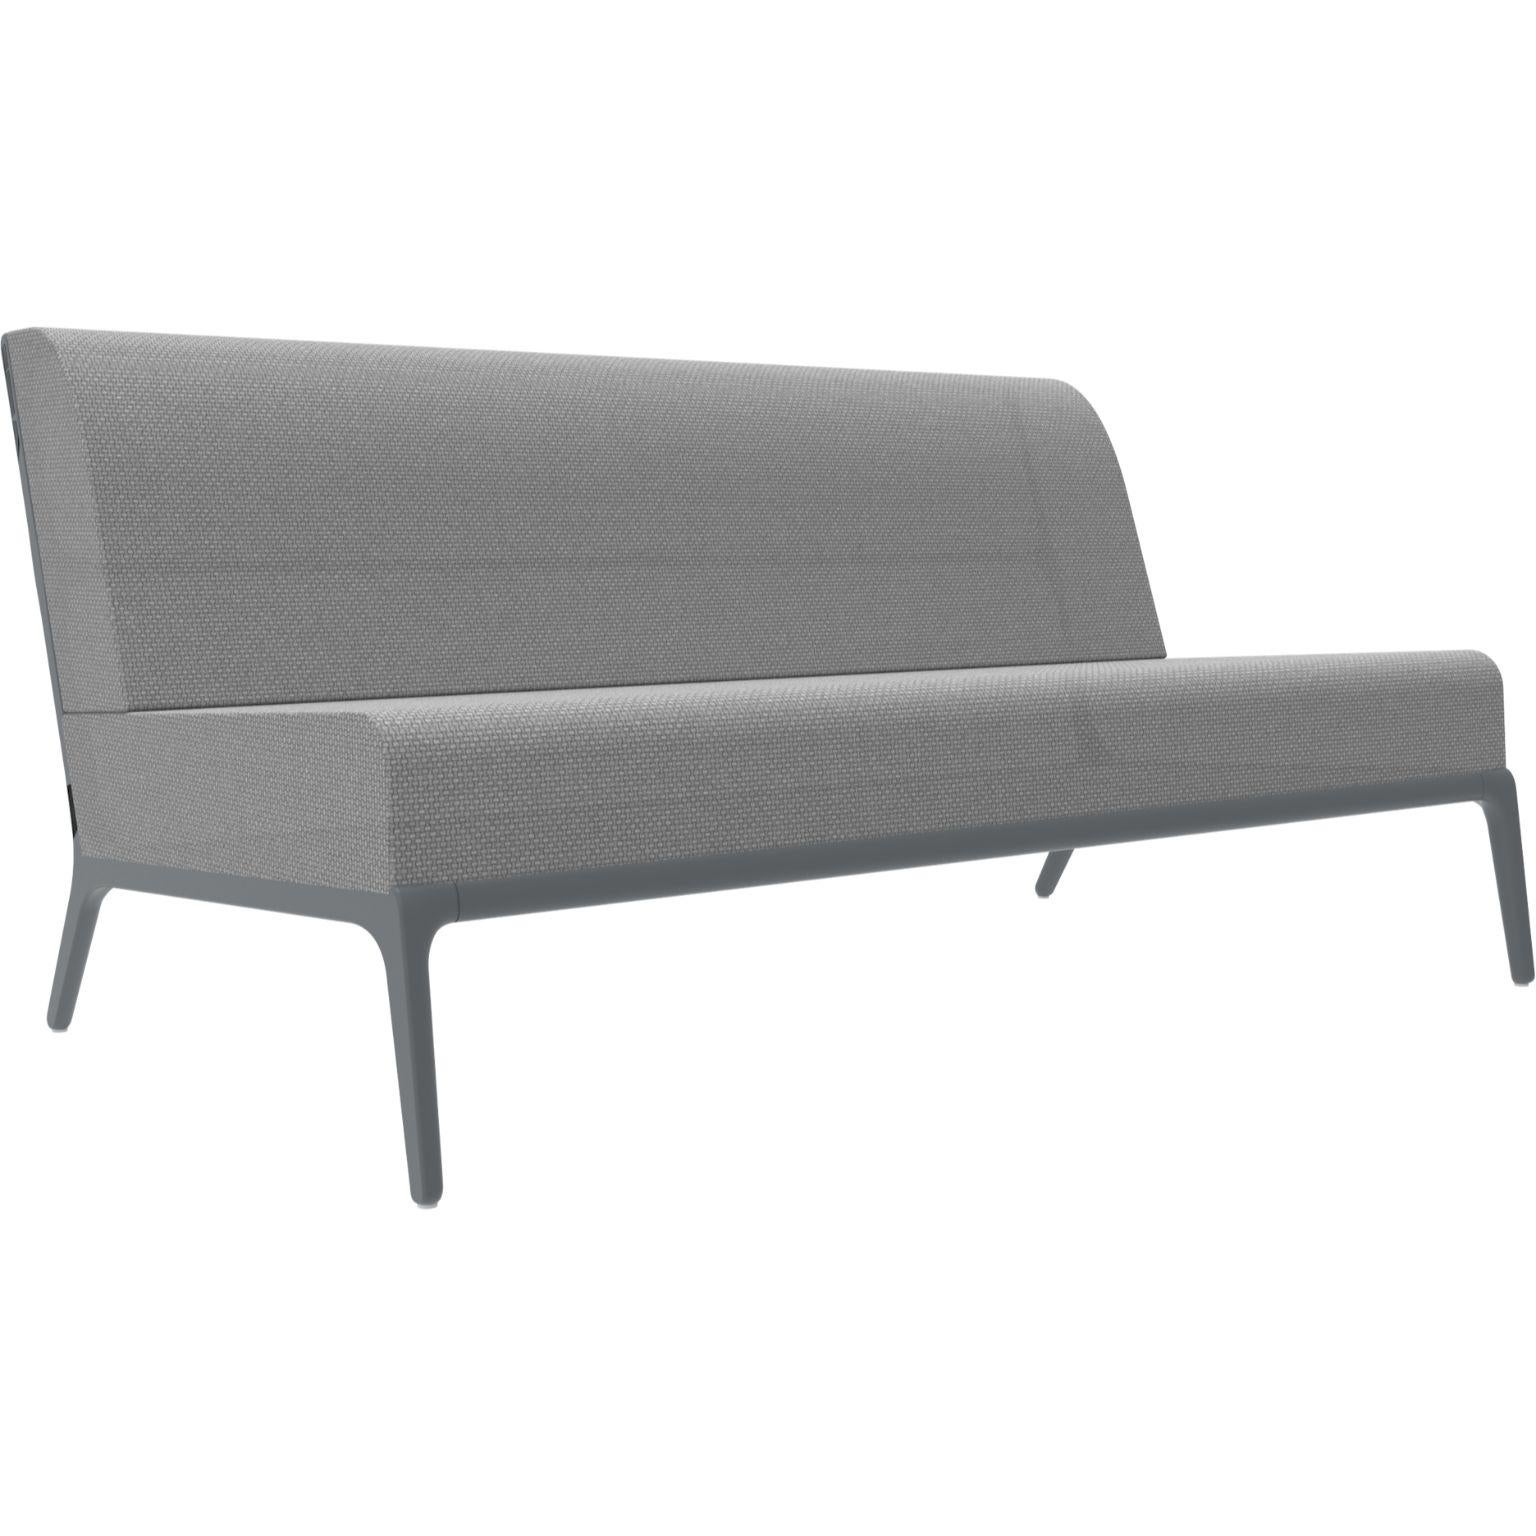 Xaloc Central 160 grey modular sofa by Mowee
Dimensions: D 100 x W 160 x H 81 cm (Seat height 42cm)
Material: Aluminium, Textile
Weight: 35.5 kg
Also Available in different colours and finishes.

 Xaloc synthesizes the lines of interior